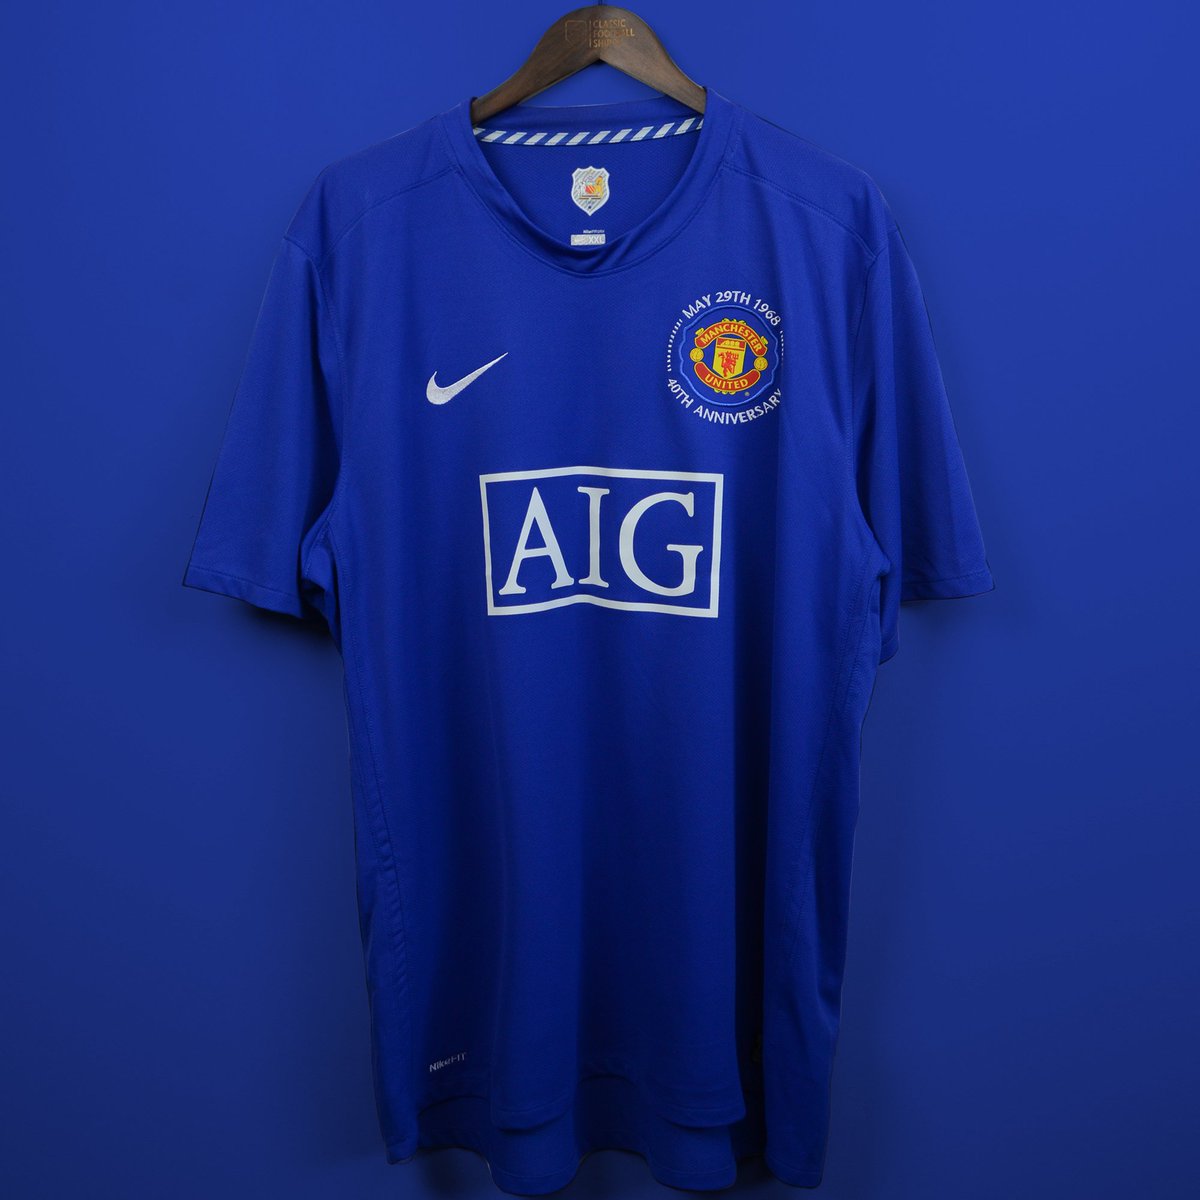 Classic Football Shirts On Twitter Man United In Blue 2008 09 This Season Nike Celebrated The 40th Anniversary Of The 1968 European Cup Final Victory Over Benfica In Which They Wore Blue Shirts